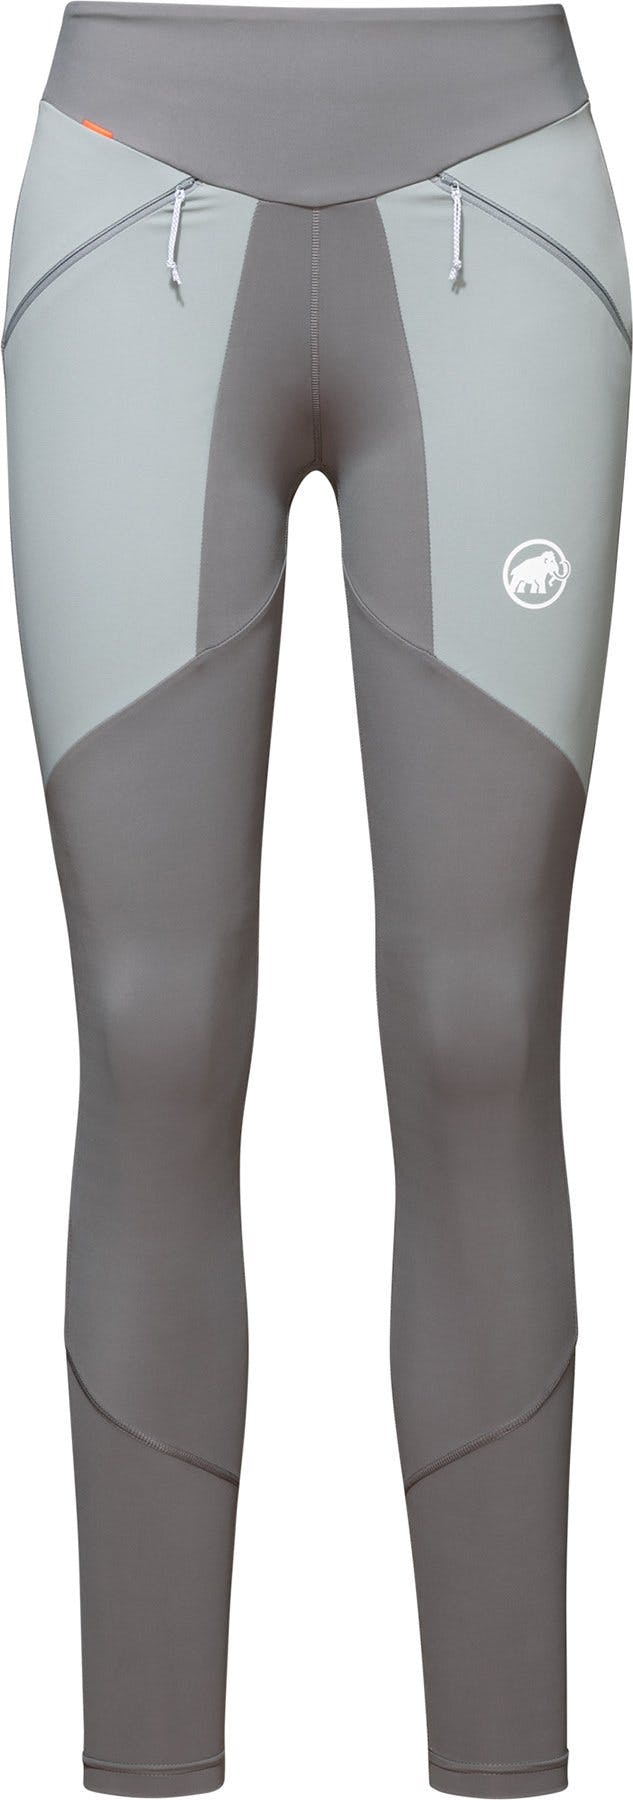 Product image for Aenergy Light Tight - Women's